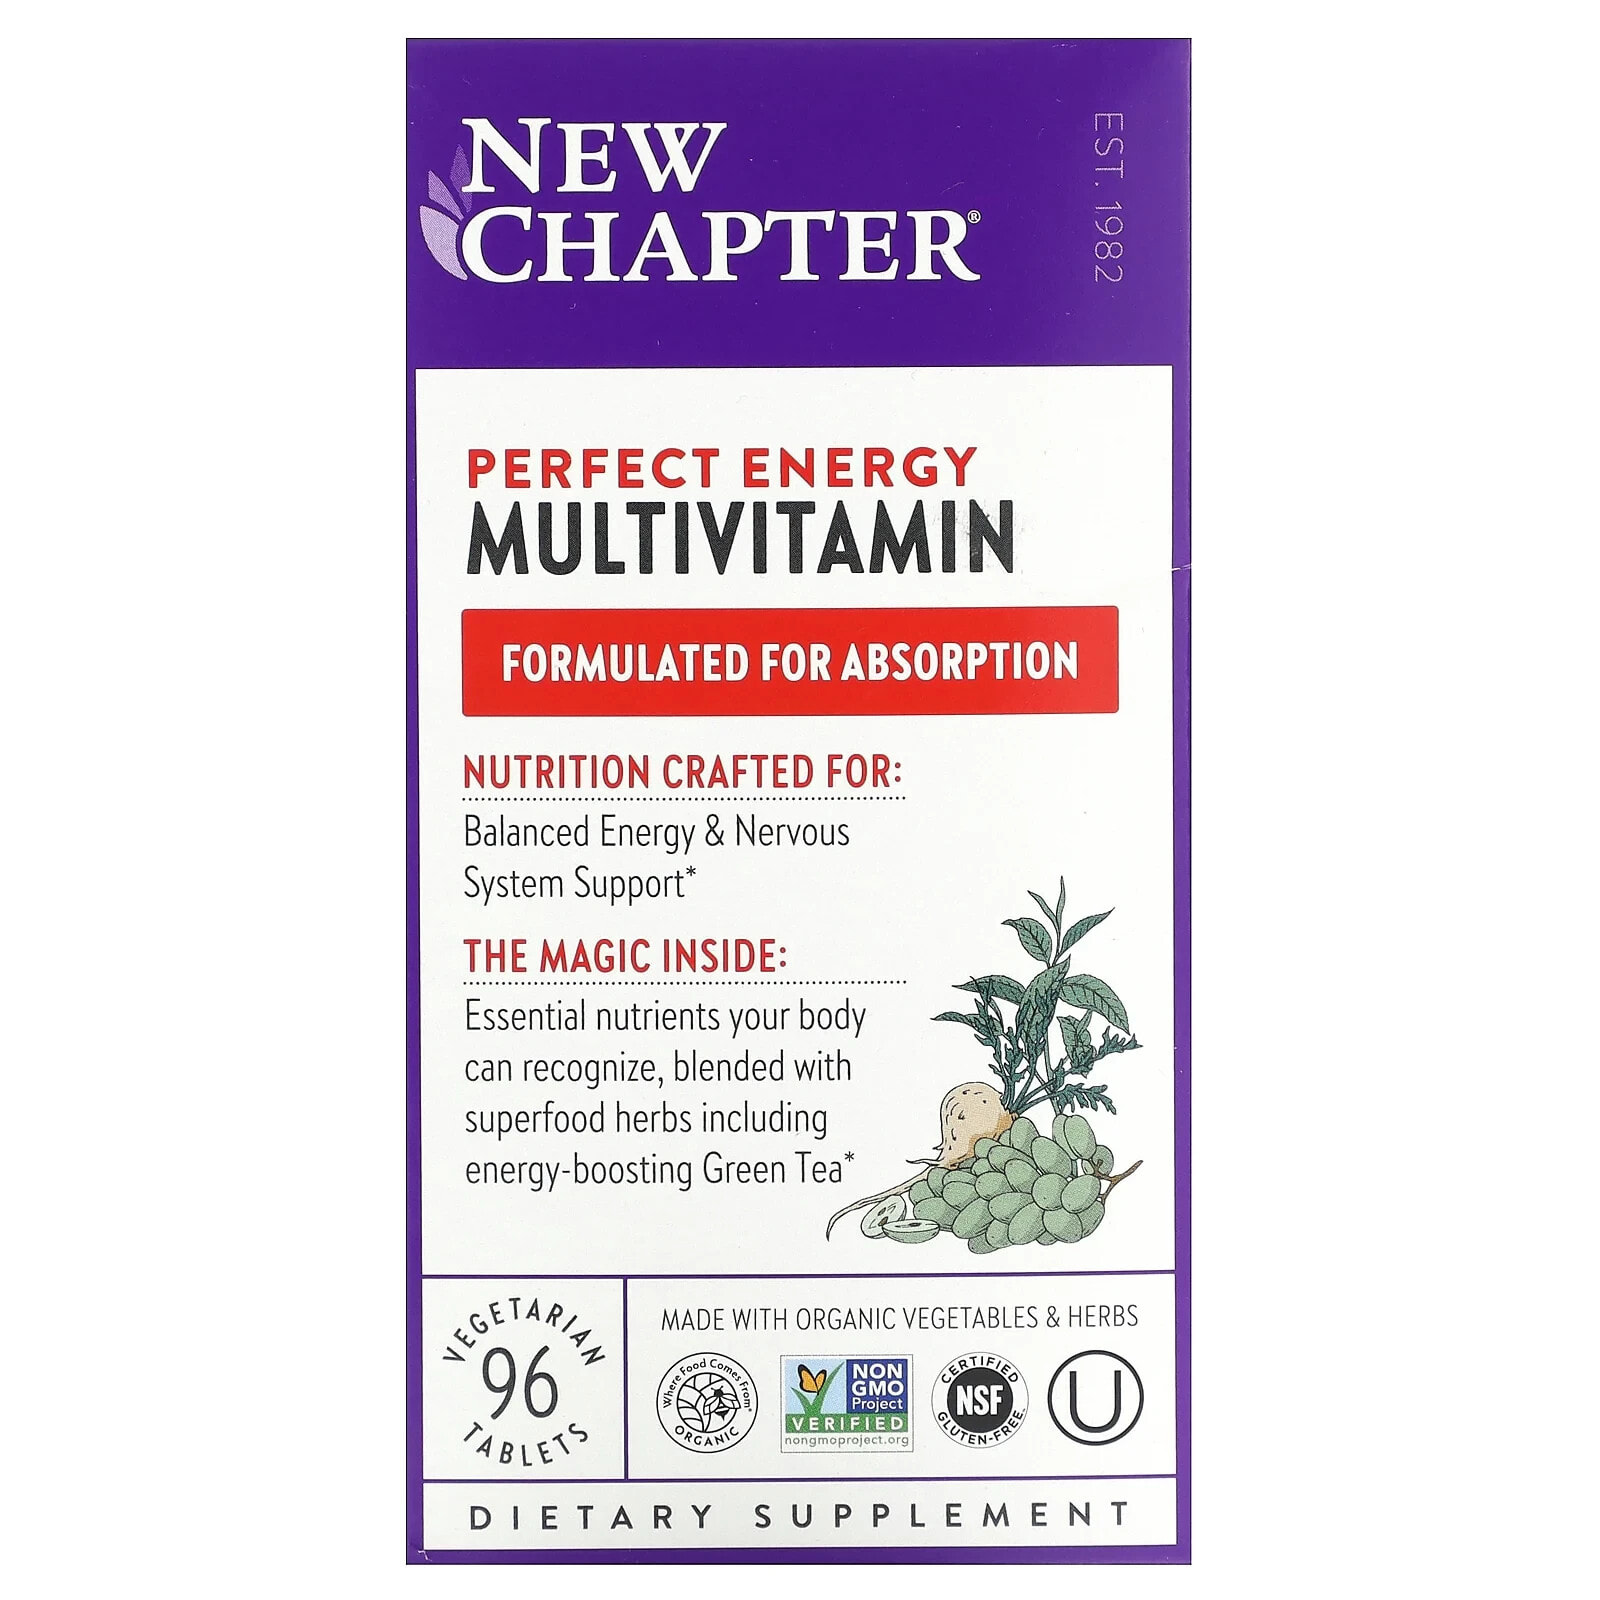 New Chapter, Perfect Energy Multivitamin, 96 Vegetarian Tablets